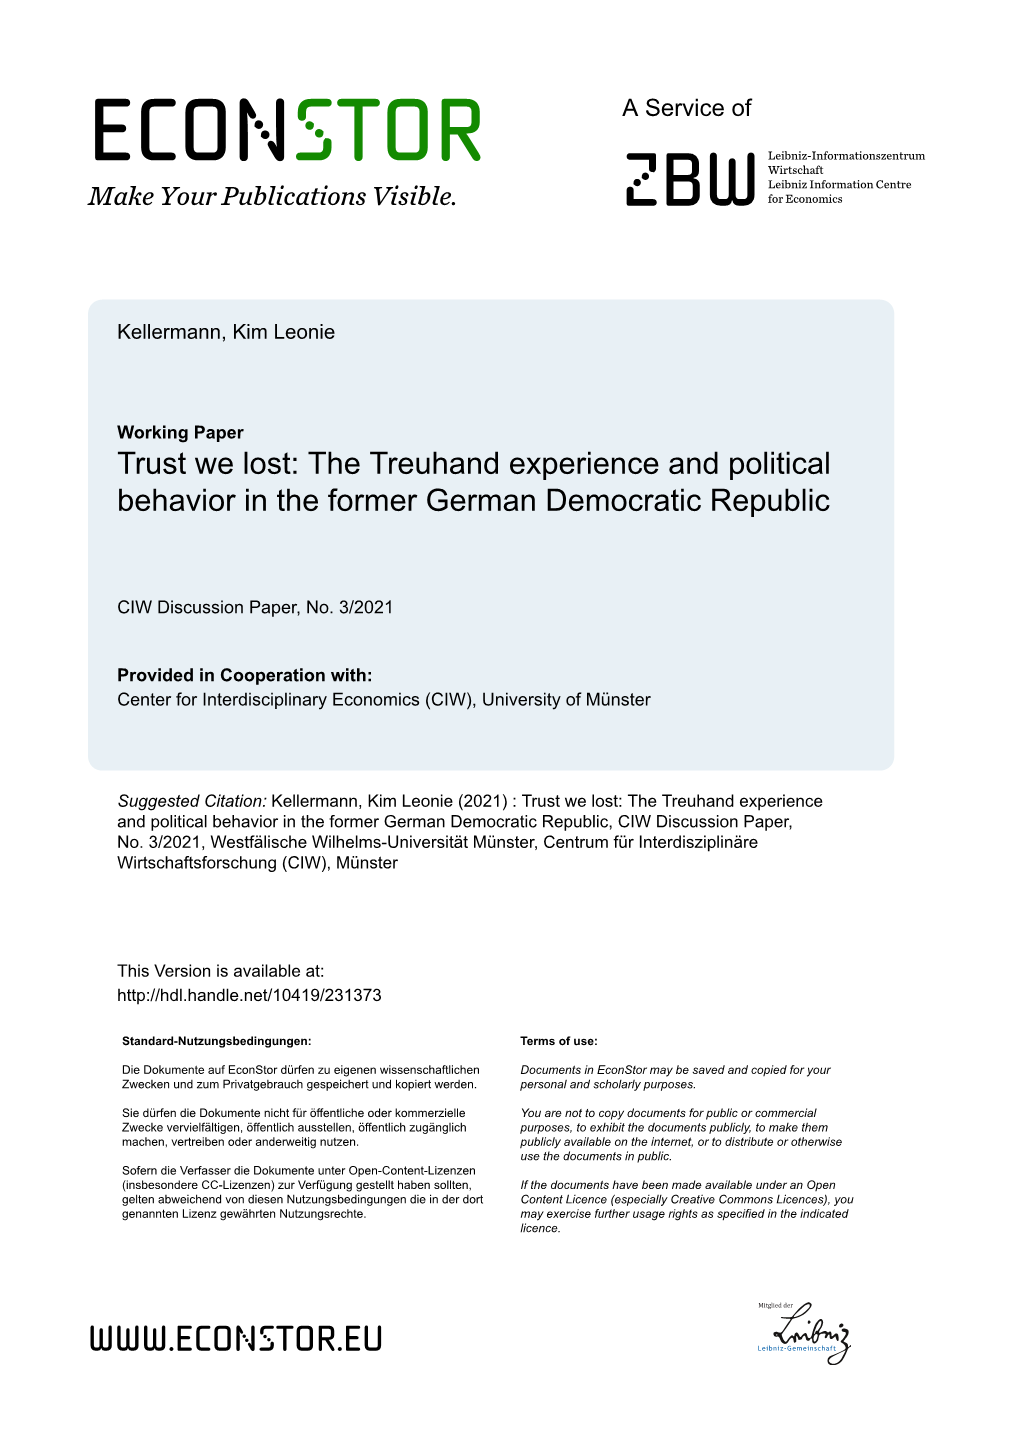 The Treuhand Experience and Political Behavior in the Former German Democratic Republic